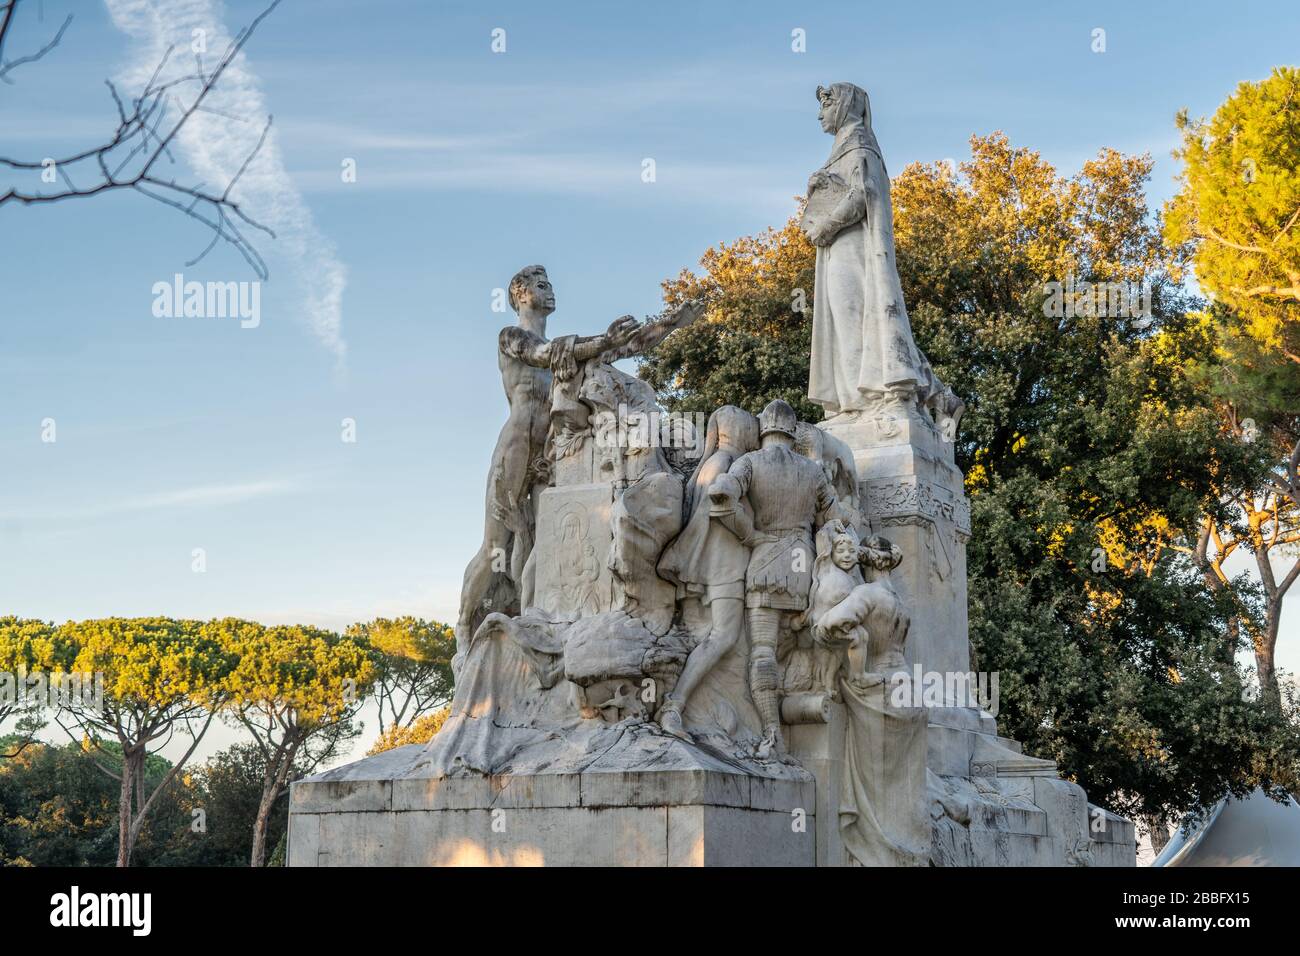 Arezzo, Tuscany, Italy - December 2019: Monument to Francesco Petrarca on the lawn walk inside of Public park Arezzo. Built in 1928, it is the largest marble complex dedicated to Francesco Petrarca Stock Photo